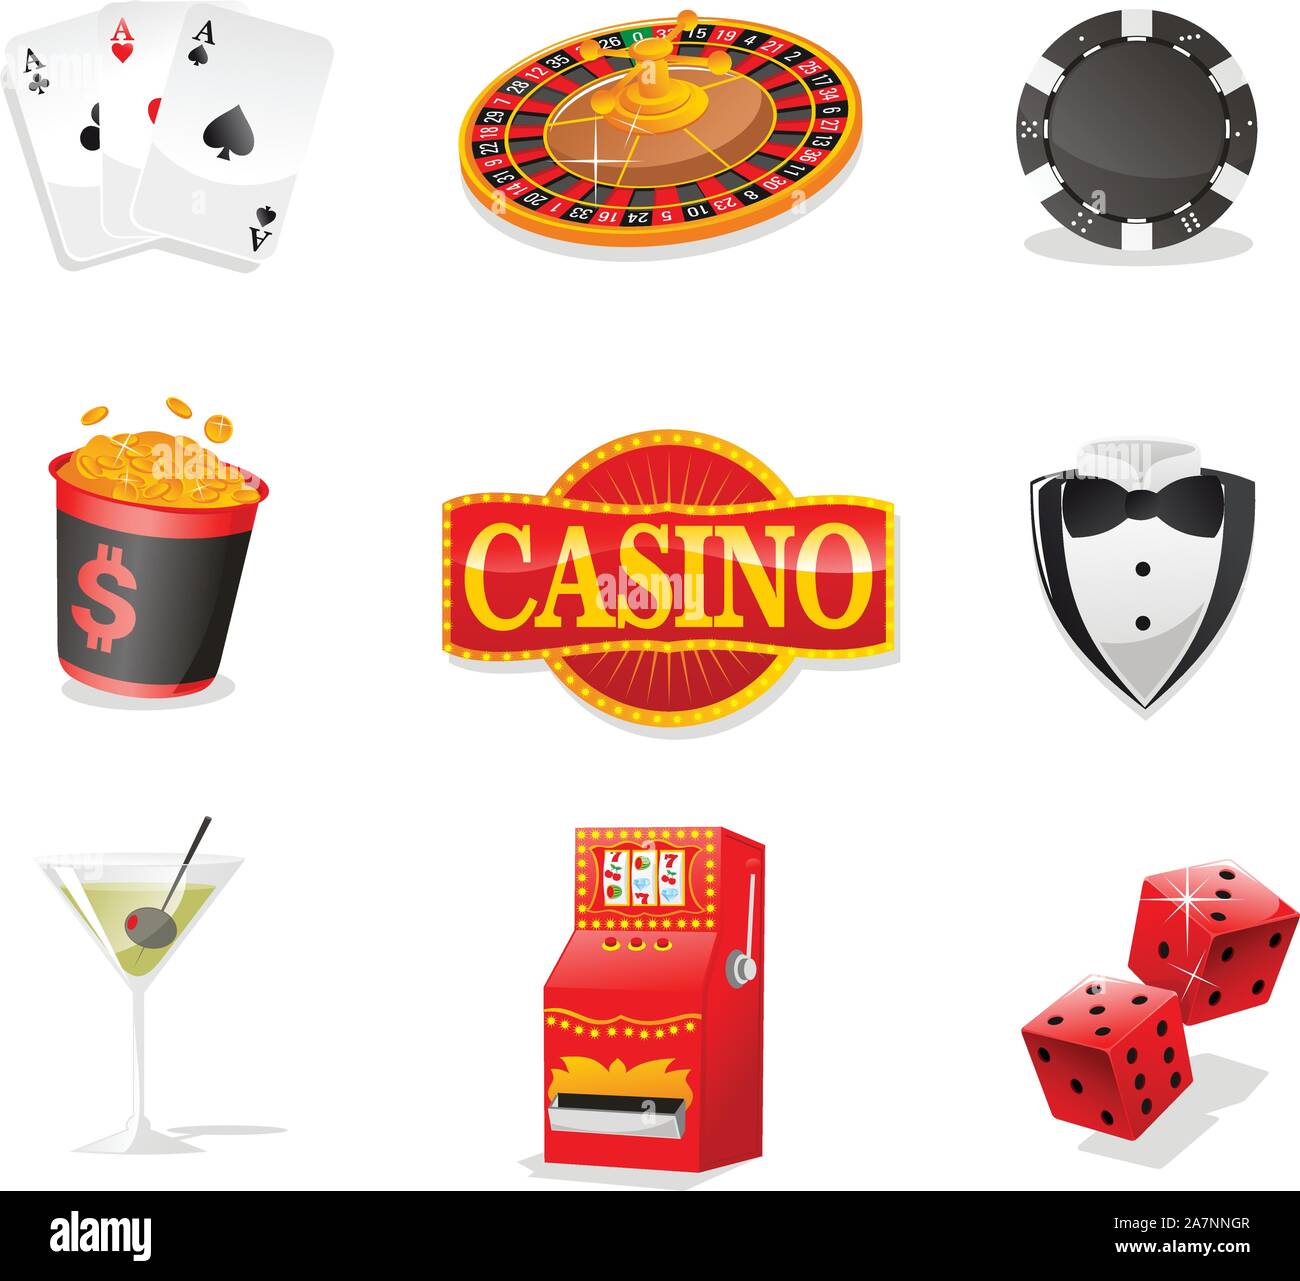 Casino design elements, with Cards, Roulette, poker Chips, Coins, Casino Sign, Suit, Drink, Slot Machine and Dices. Stock Vector